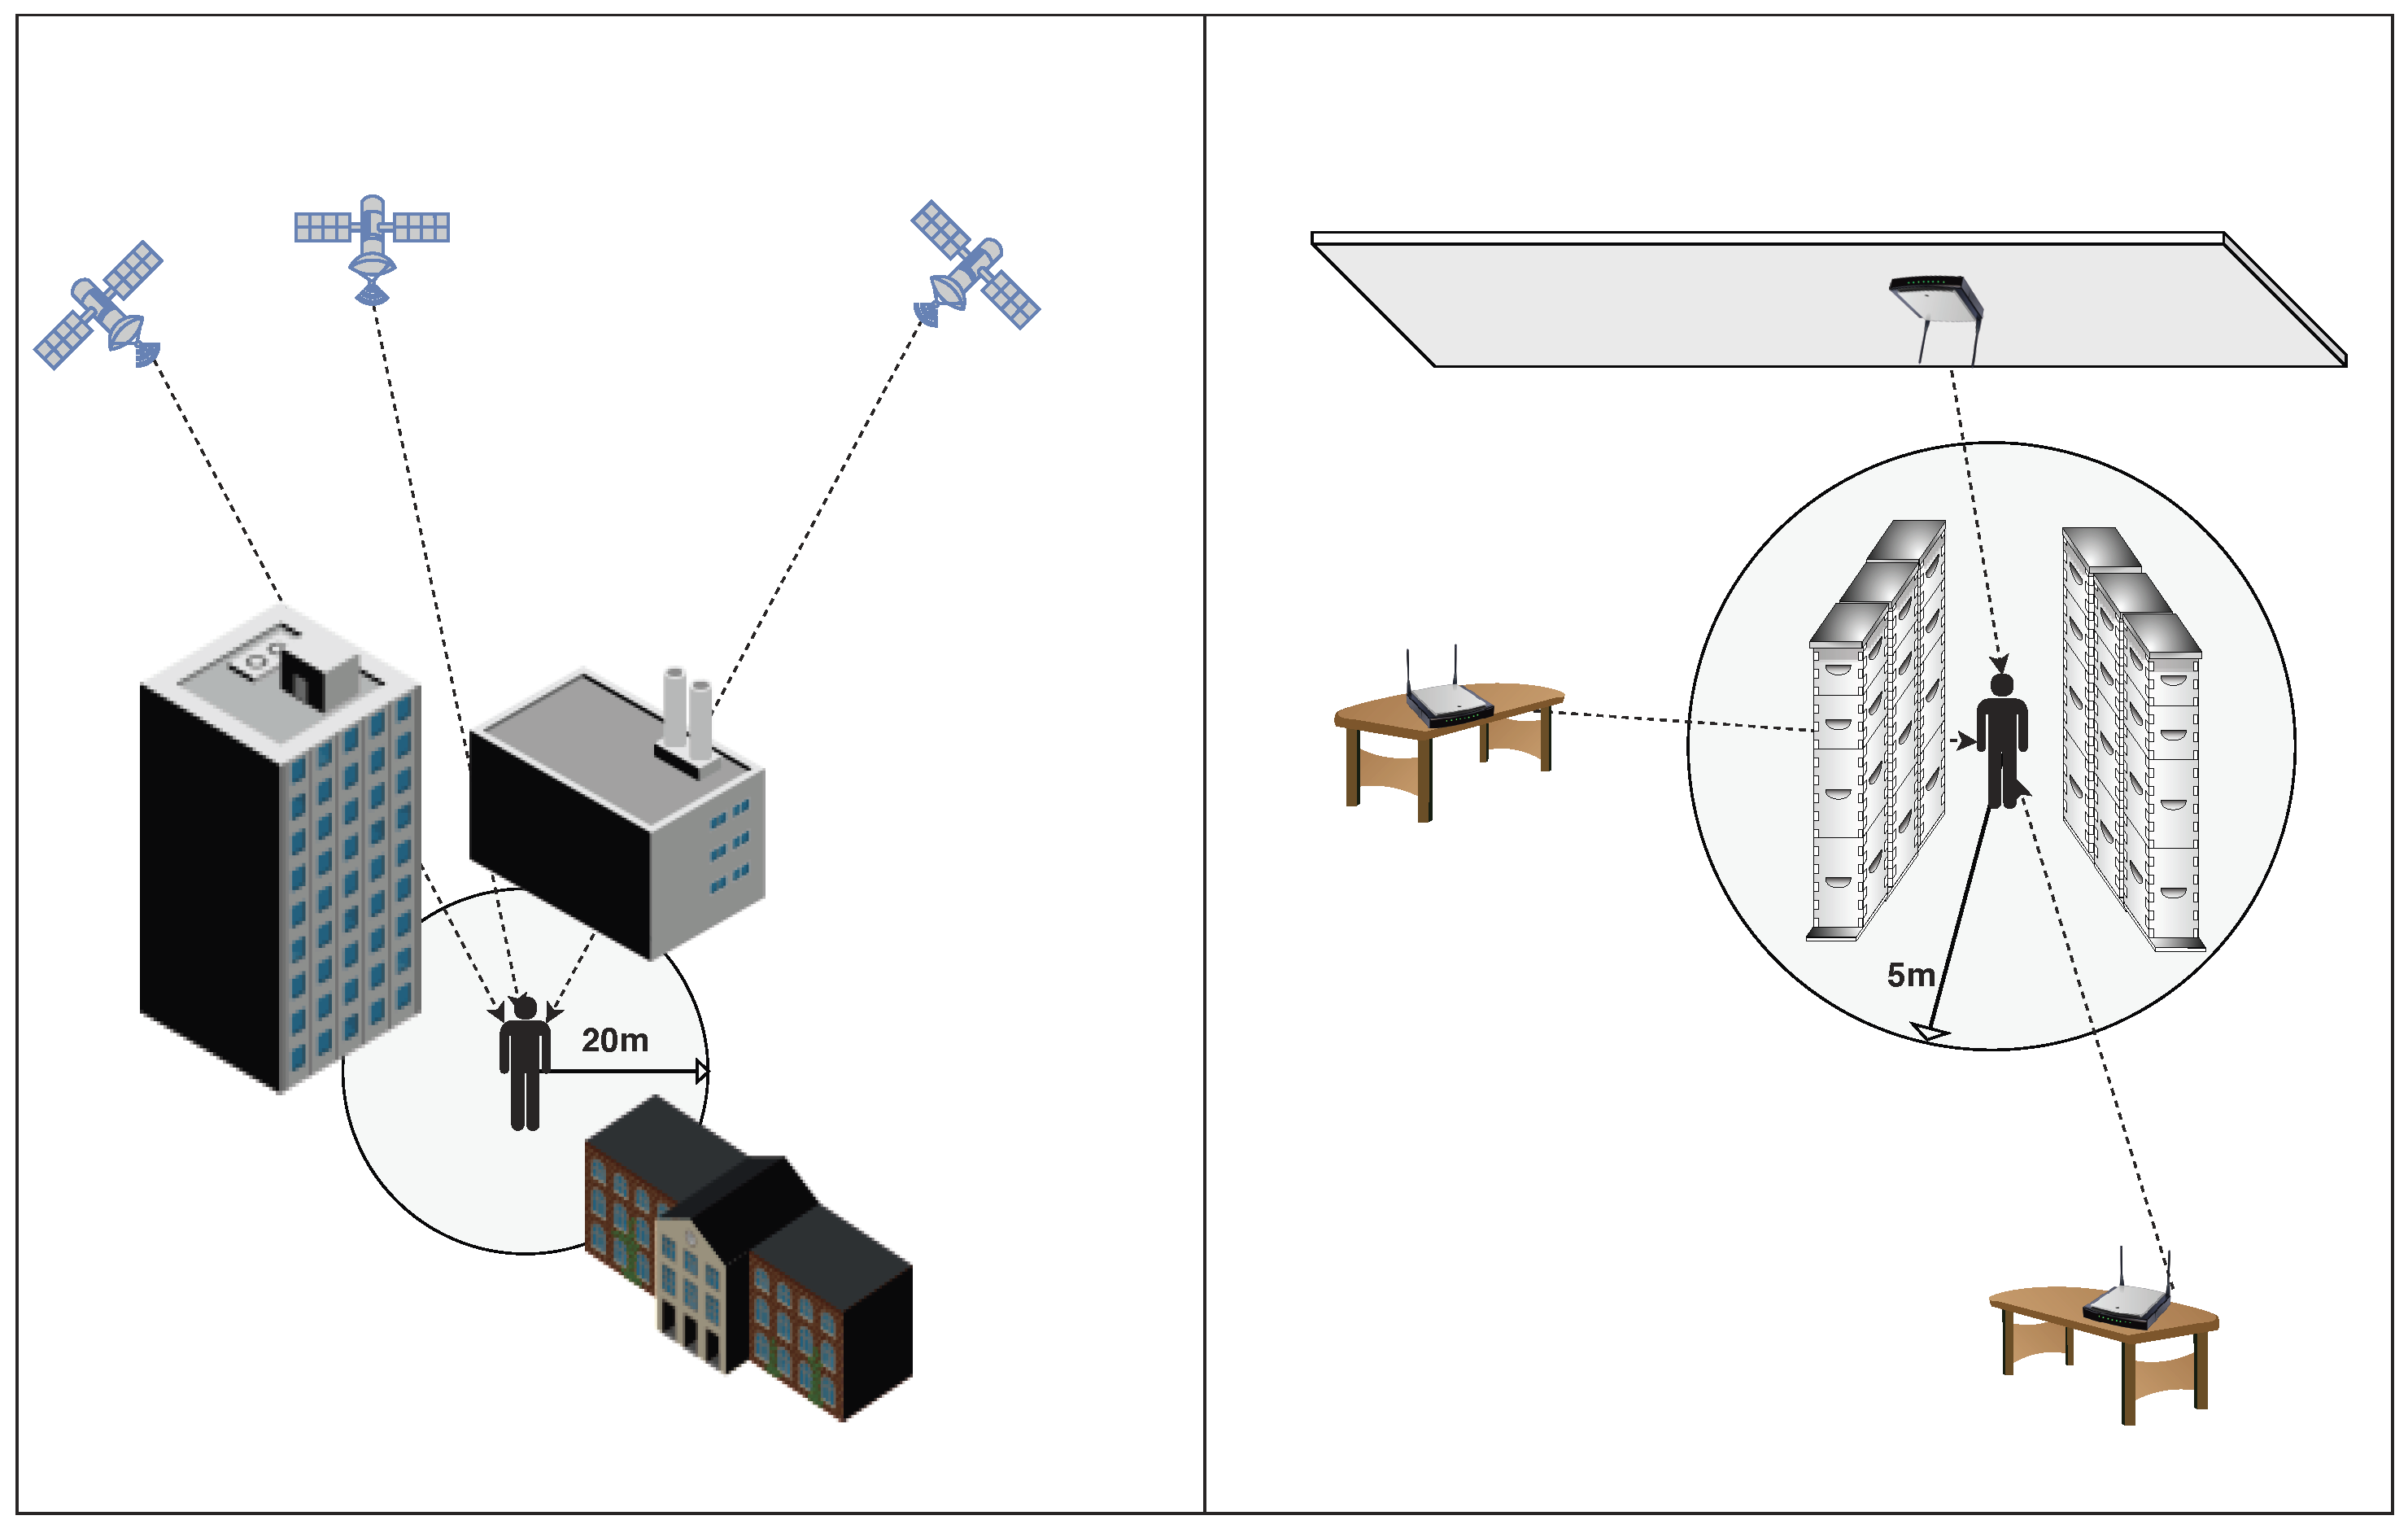 Sensors | Free Full-Text | A Meta-Review of Indoor Positioning Systems